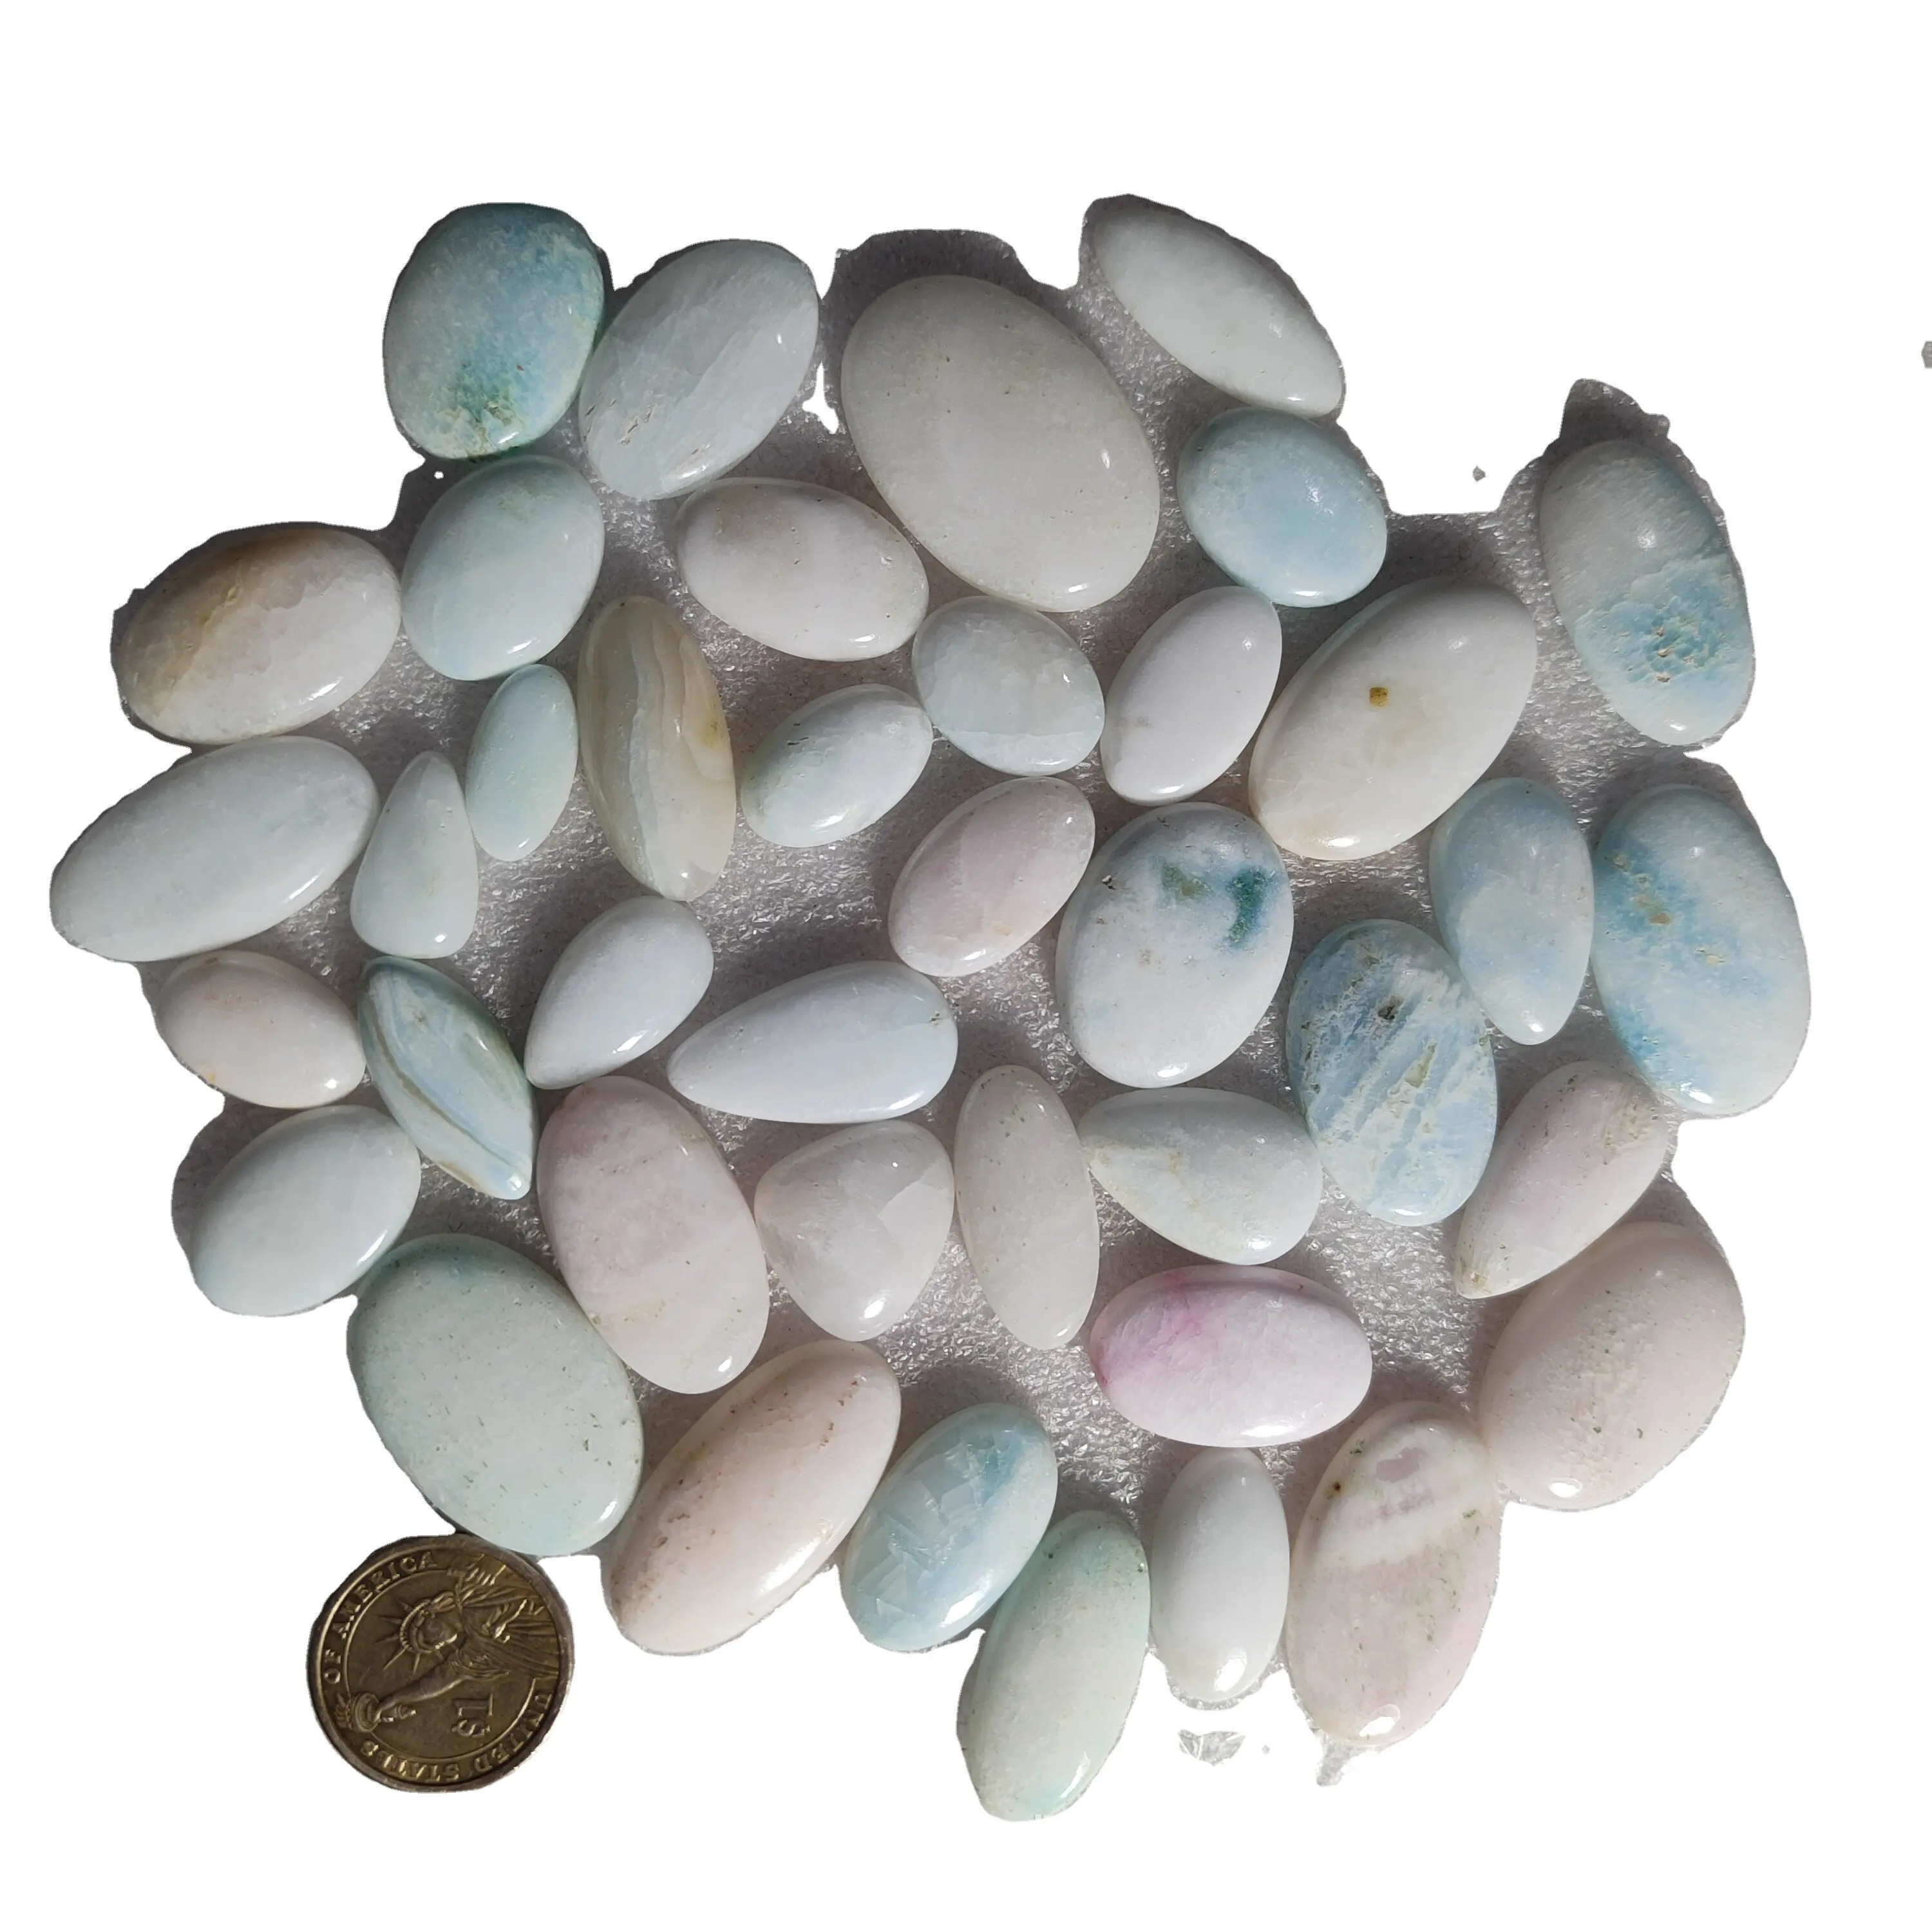 Wholesale Natural Australian Opal Gemstone Quartz Mix Shape and Color Free Size with Third Party Appraisal Certificate